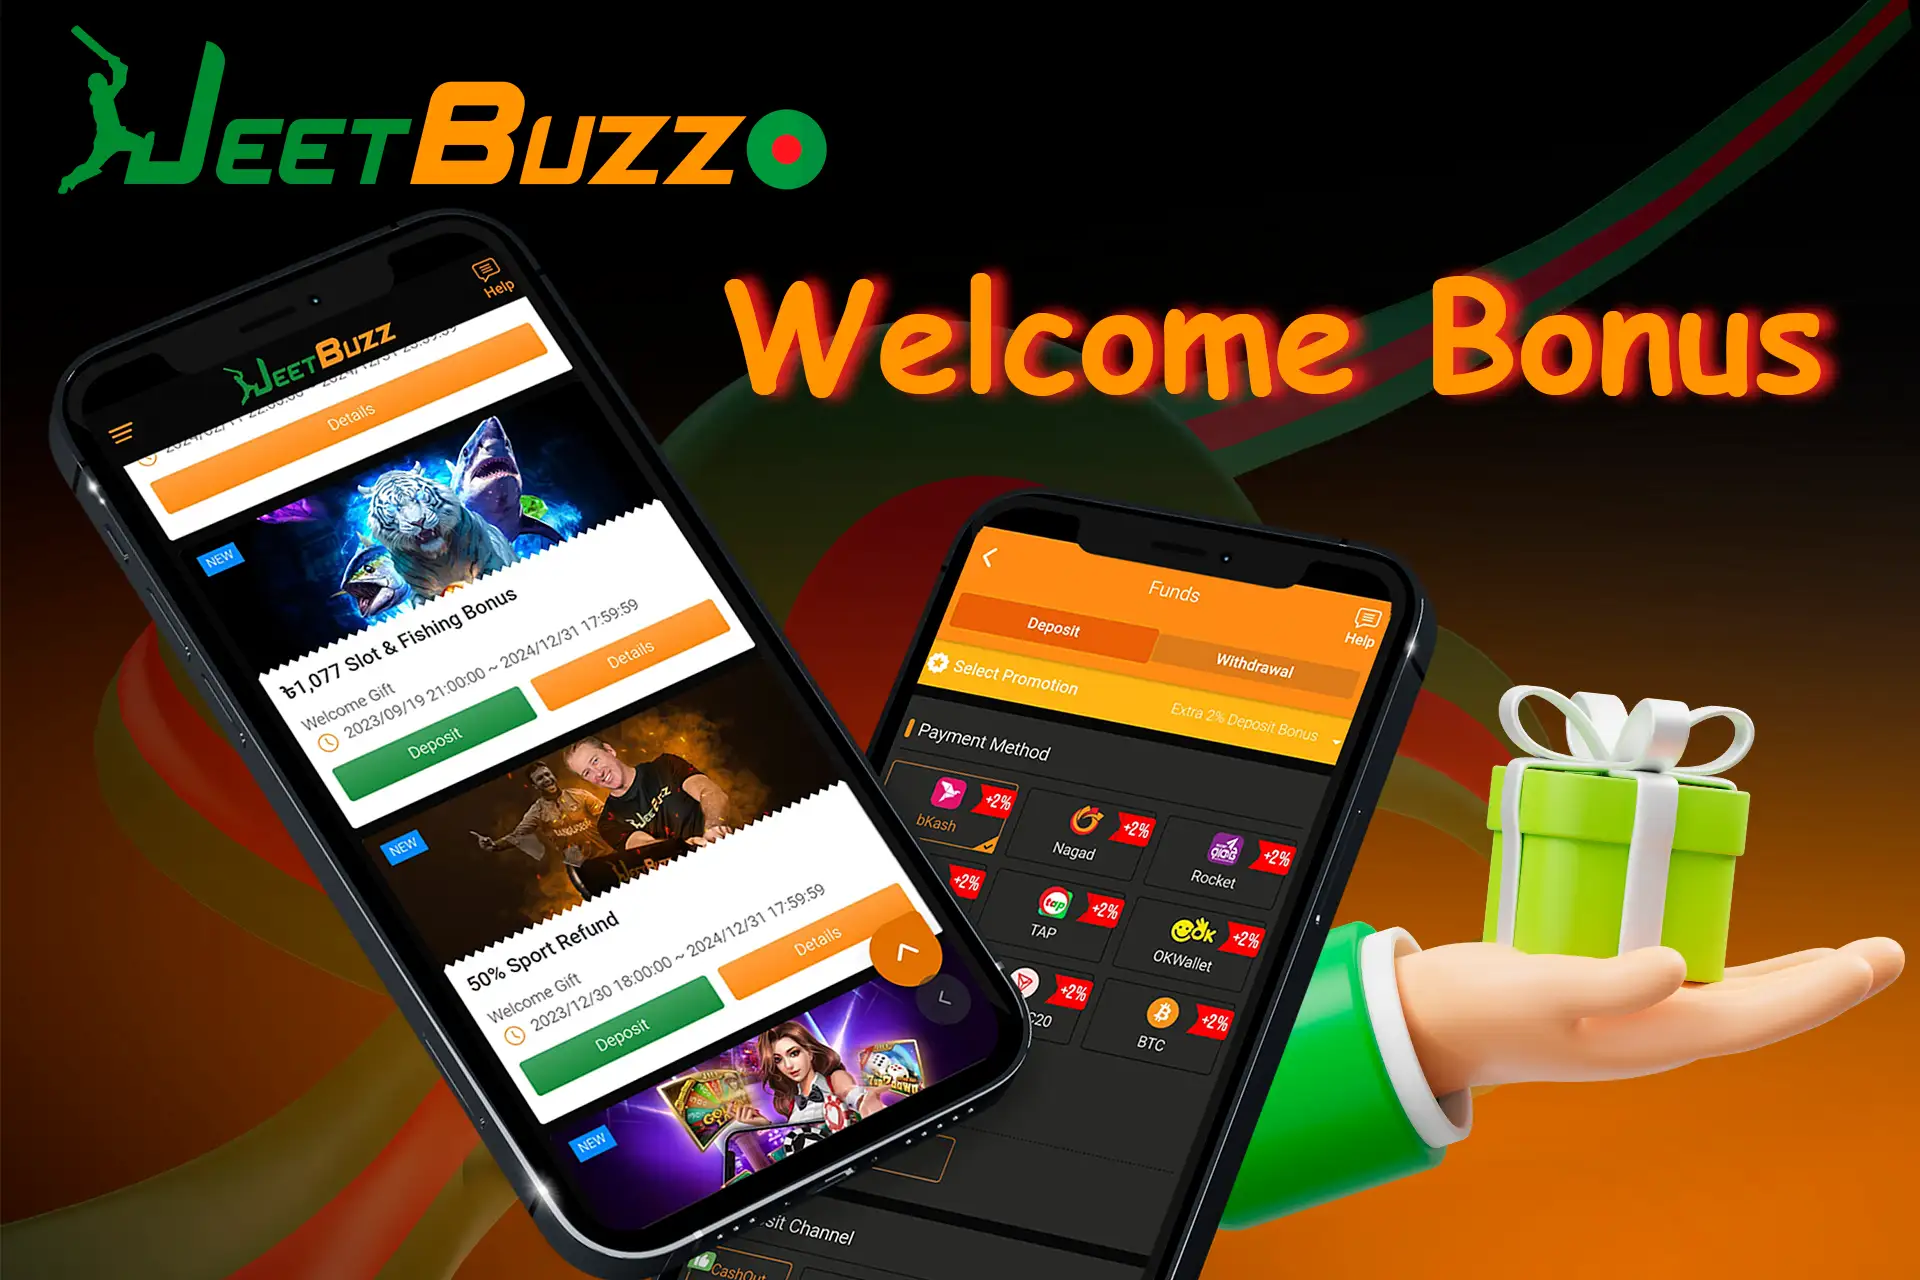 steps required to claim JeetBuzz welcome bonus